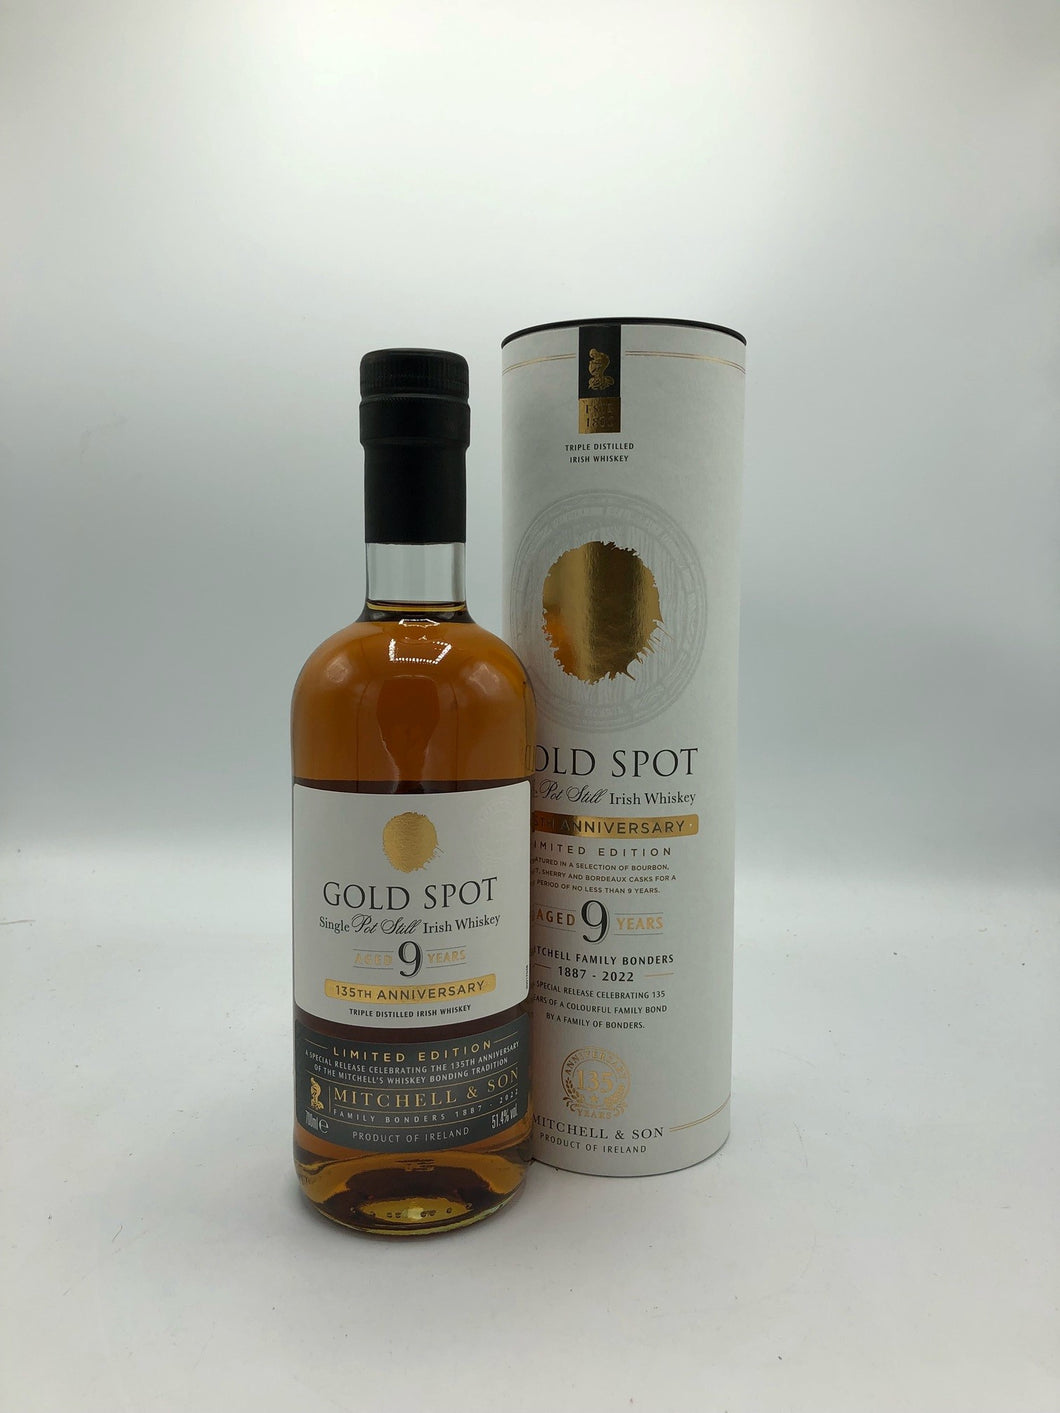 Gold Spot 9 Year Old 135th Anniversary Release